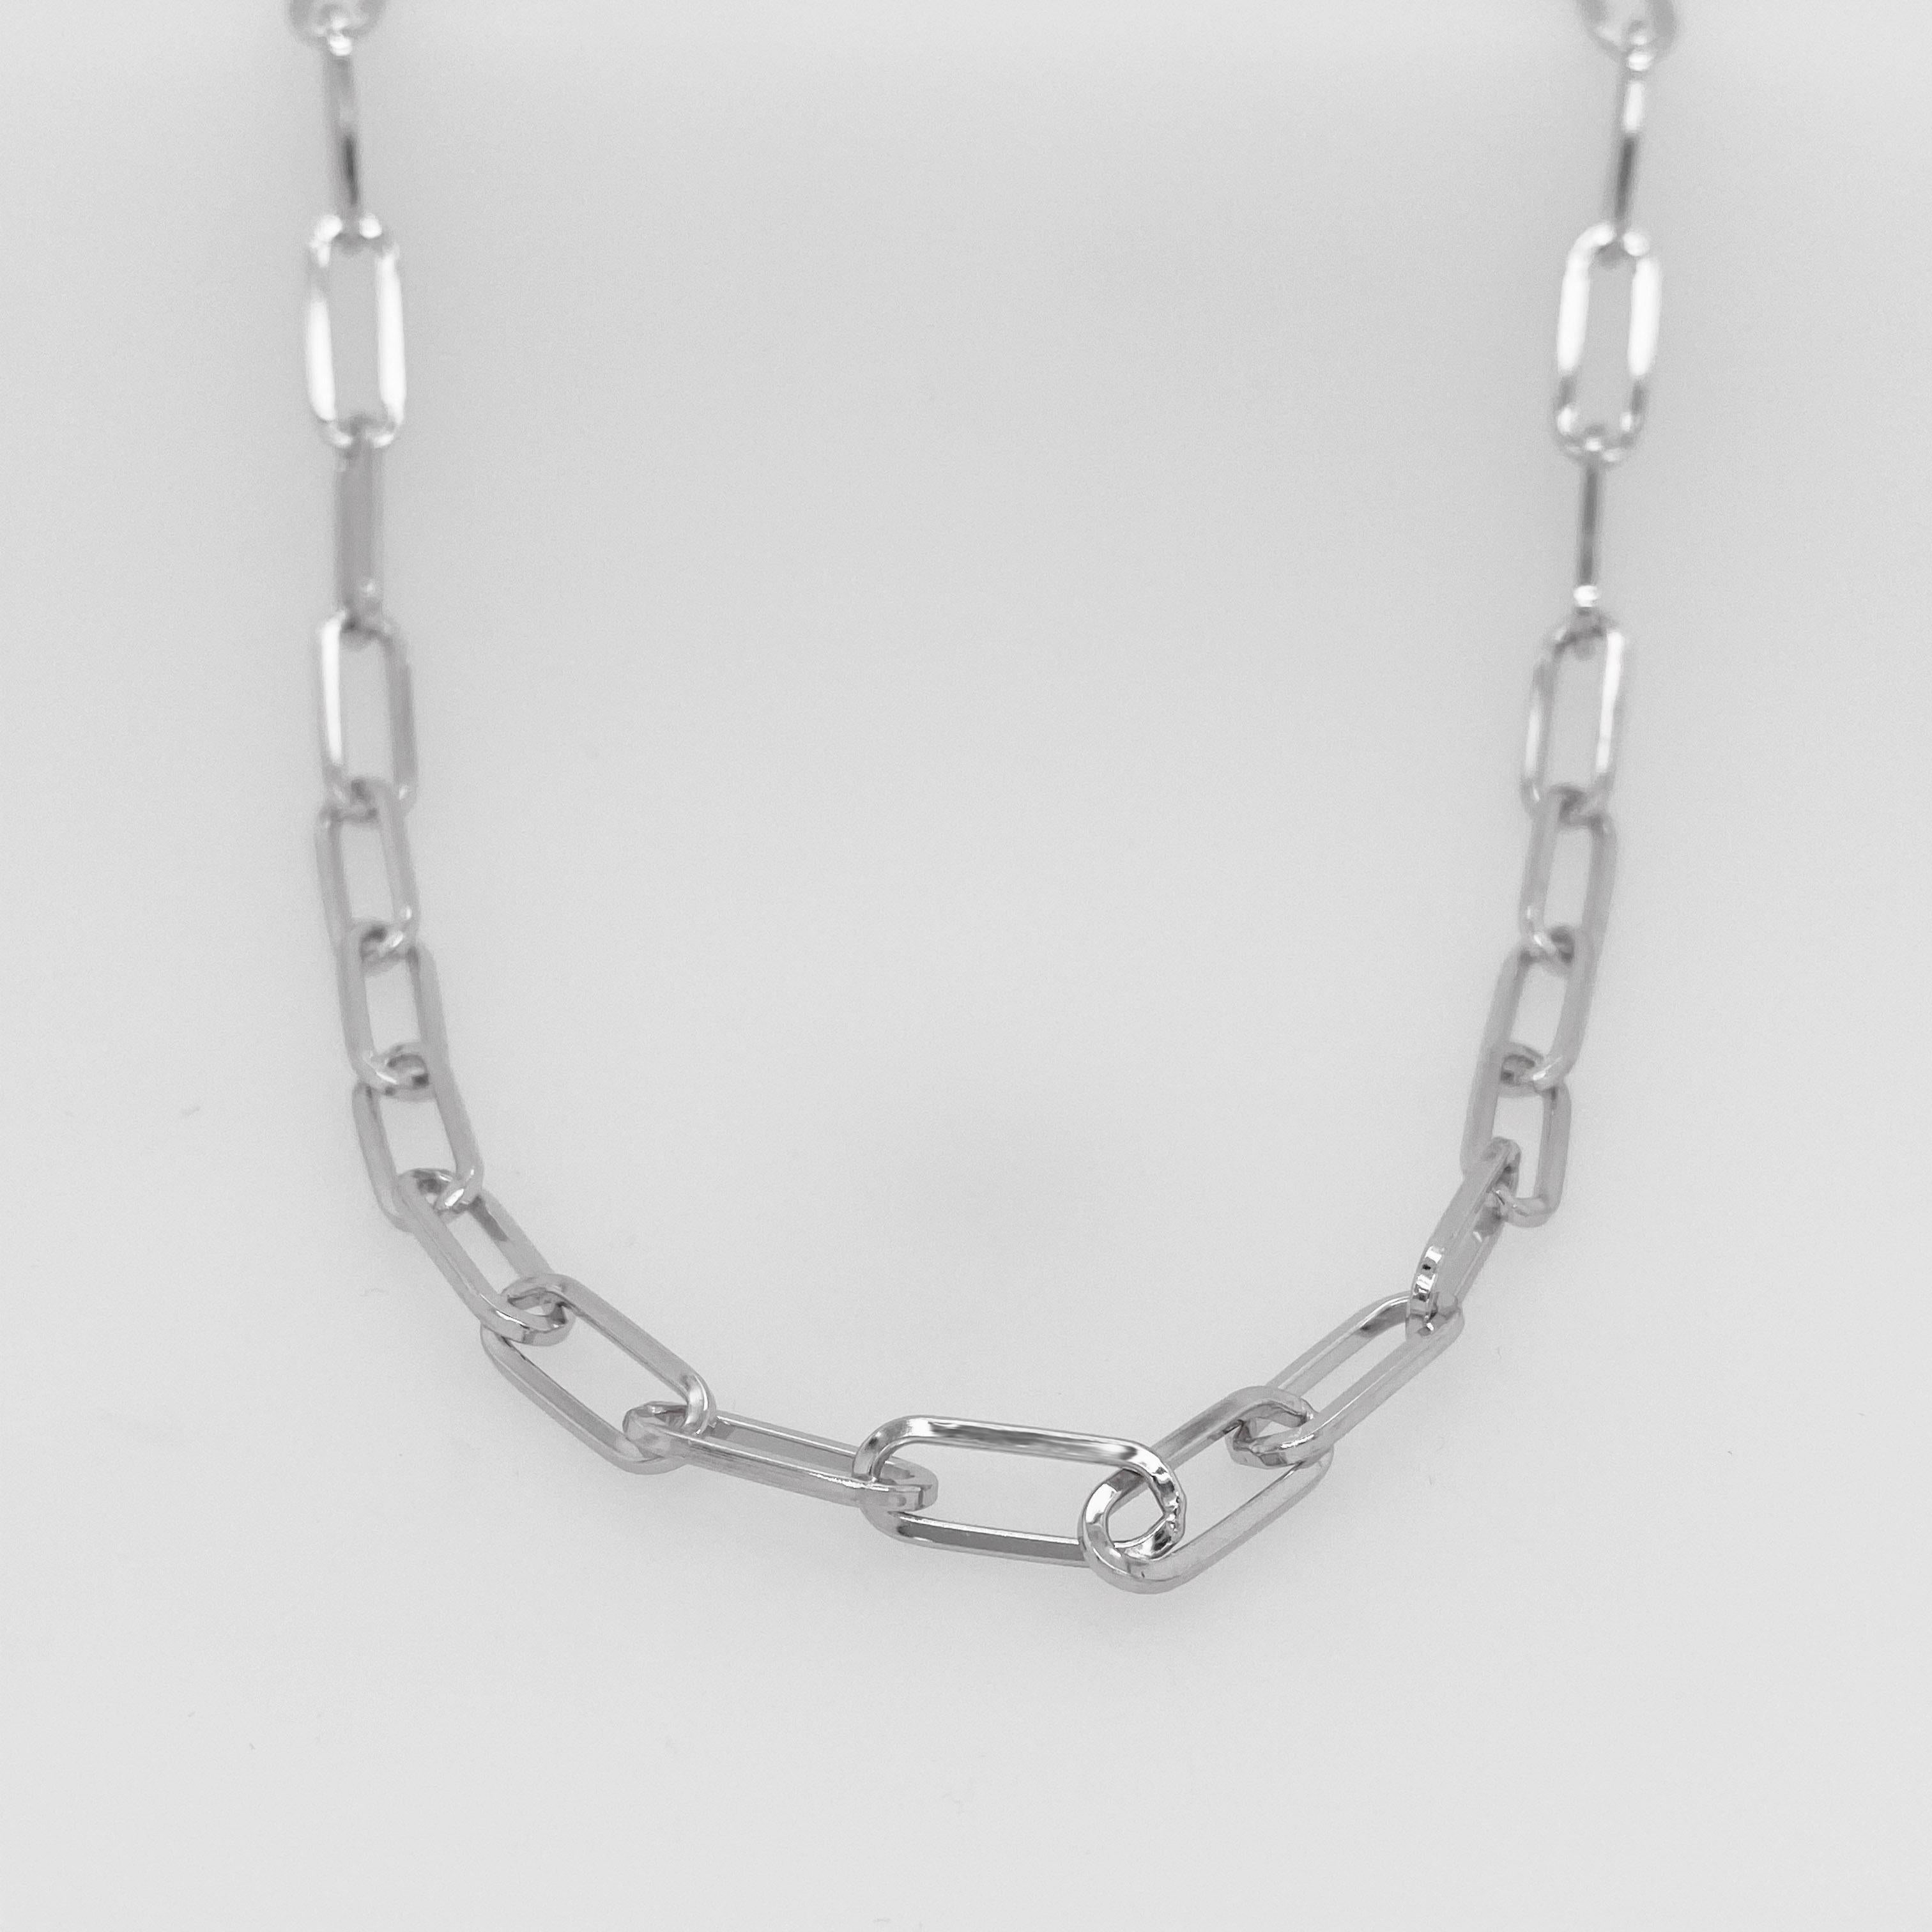 This wide paperclip chain in sterling silver makes a great statement! This bracelet is perfect for a woman or man!

Sterling Silver
Link Width: 5.9 millimeters/.24in
Link Height: 15.61mm/.61in
Chain Length: 8in
Weight: 8.6 grams

This paperclip